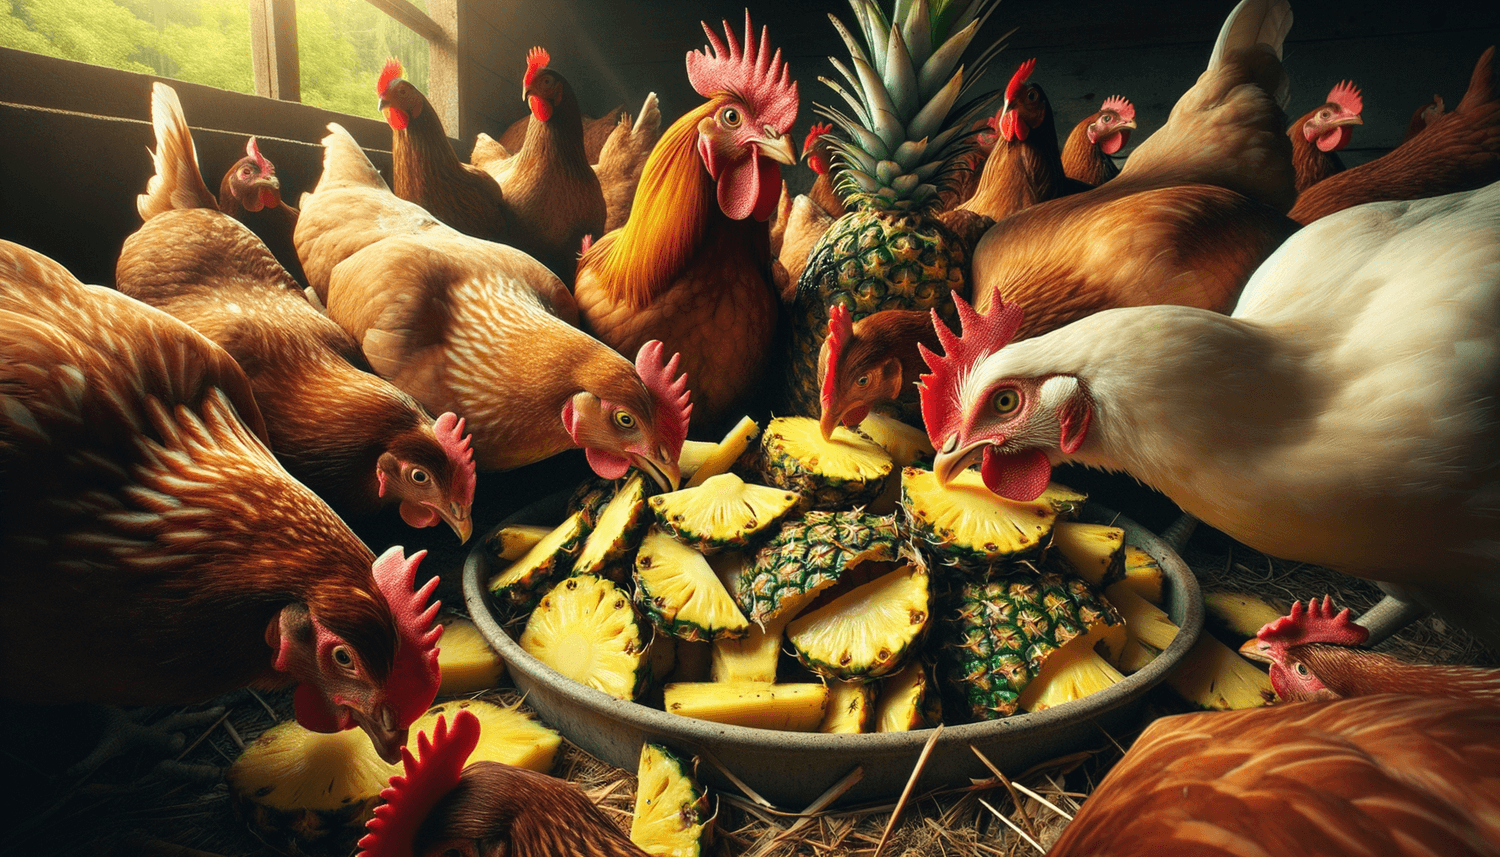 Can Chickens Eat Pineapple Skins?